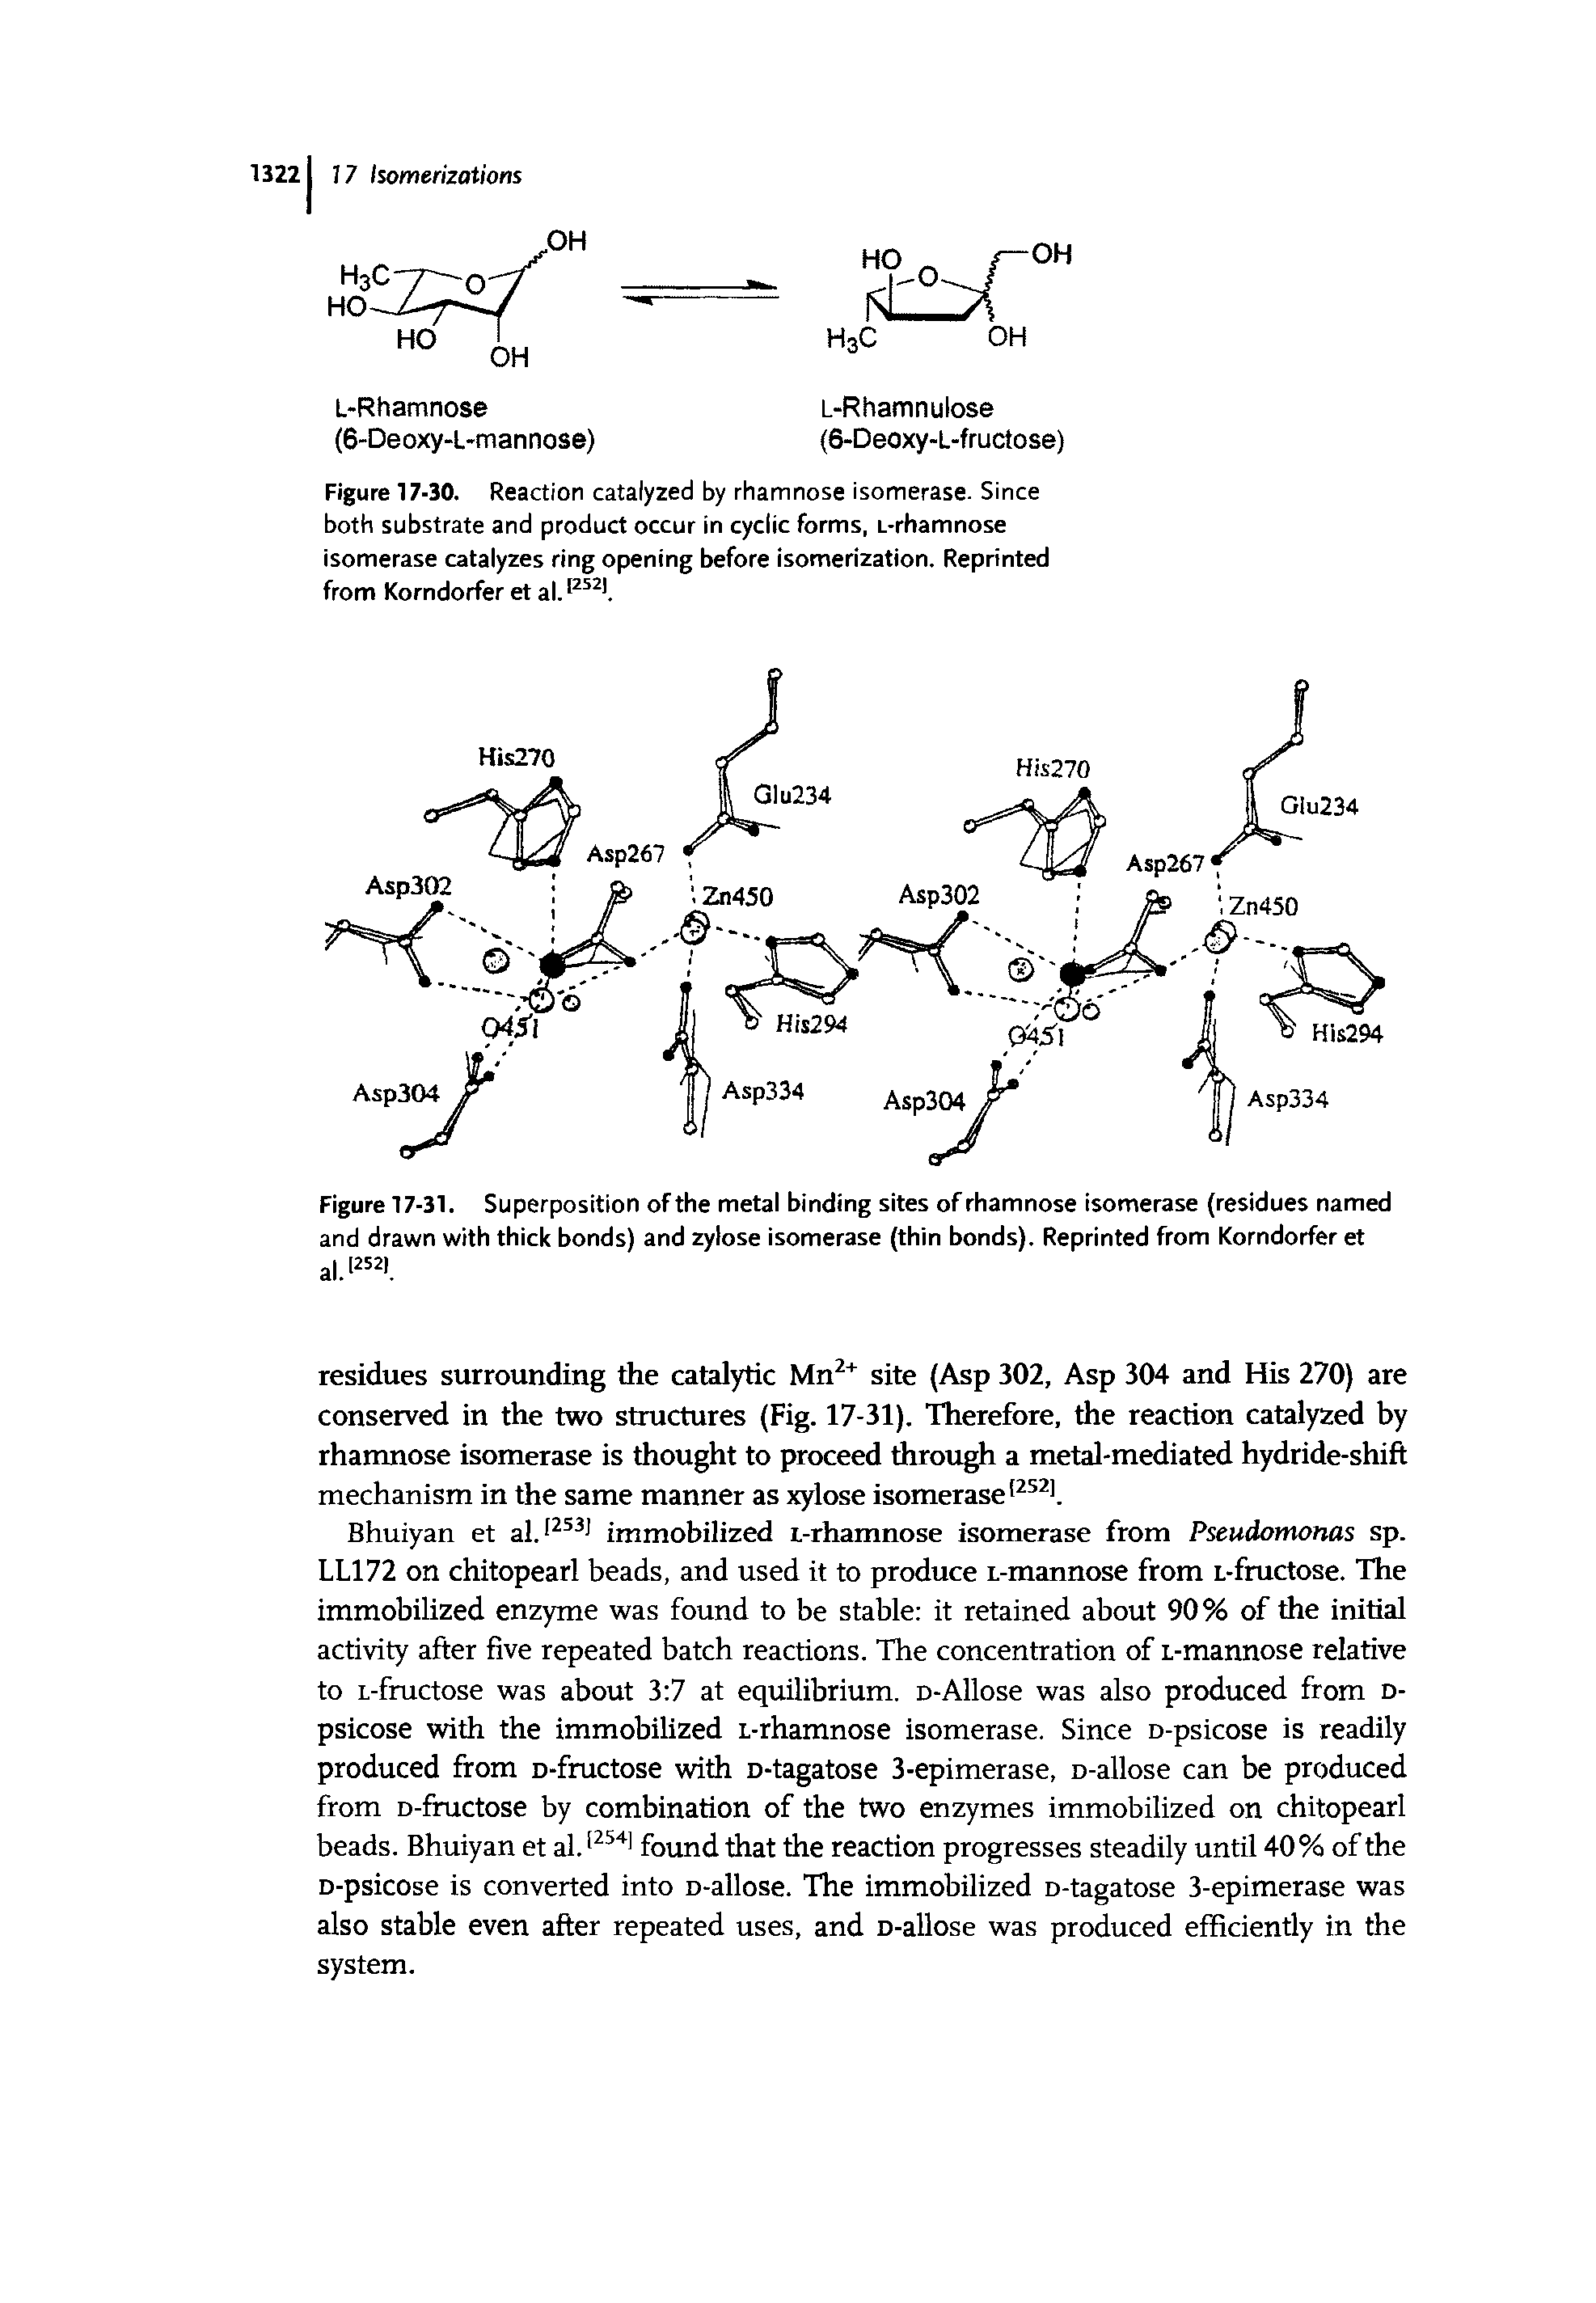 Figure 17-30. Reaction catalyzed by rhamnose isomerase. Since both substrate and product occur in cyclic forms, L-rhamnose isomerase catalyzes ring opening before isomerization. Reprinted from Korndorfer et al. 252).